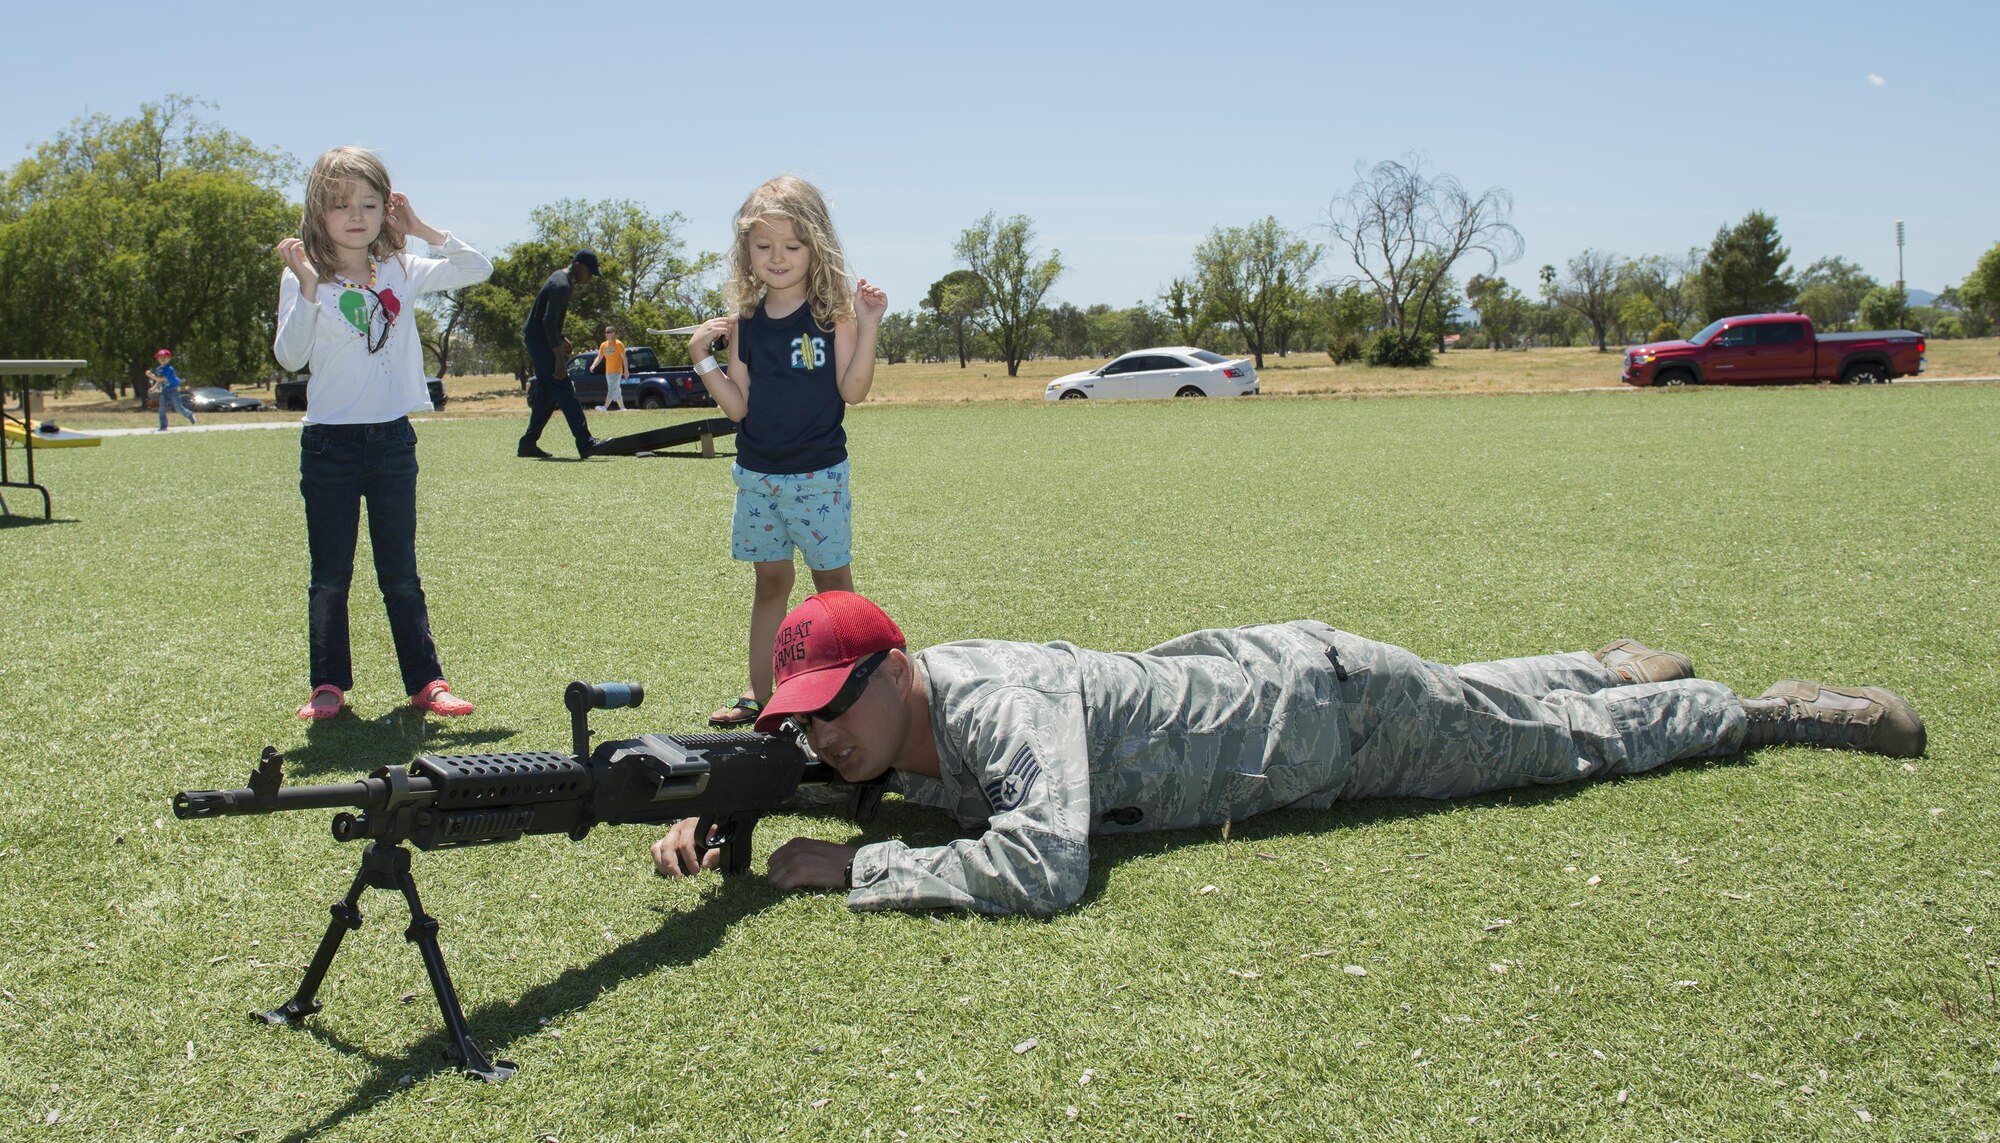 Staff Sgt. Christopher Rainwater, 60th Security Forces Squadron, demonstrates how to line up the shot during the National Police Week Picnic May 17, 2017 at Travis Air Force Base, Calif.  Established by a joint resolution of Congress in 1962, National Police Week pays special recognition to law enforcement officers who have lost their lives in the line of duty for the safety and protection of others. Police Week gives the 60th SFS an opportunity to inform, educate and strengthen Travis community relations. (U.S. Air Force photo/ Heide Couch)